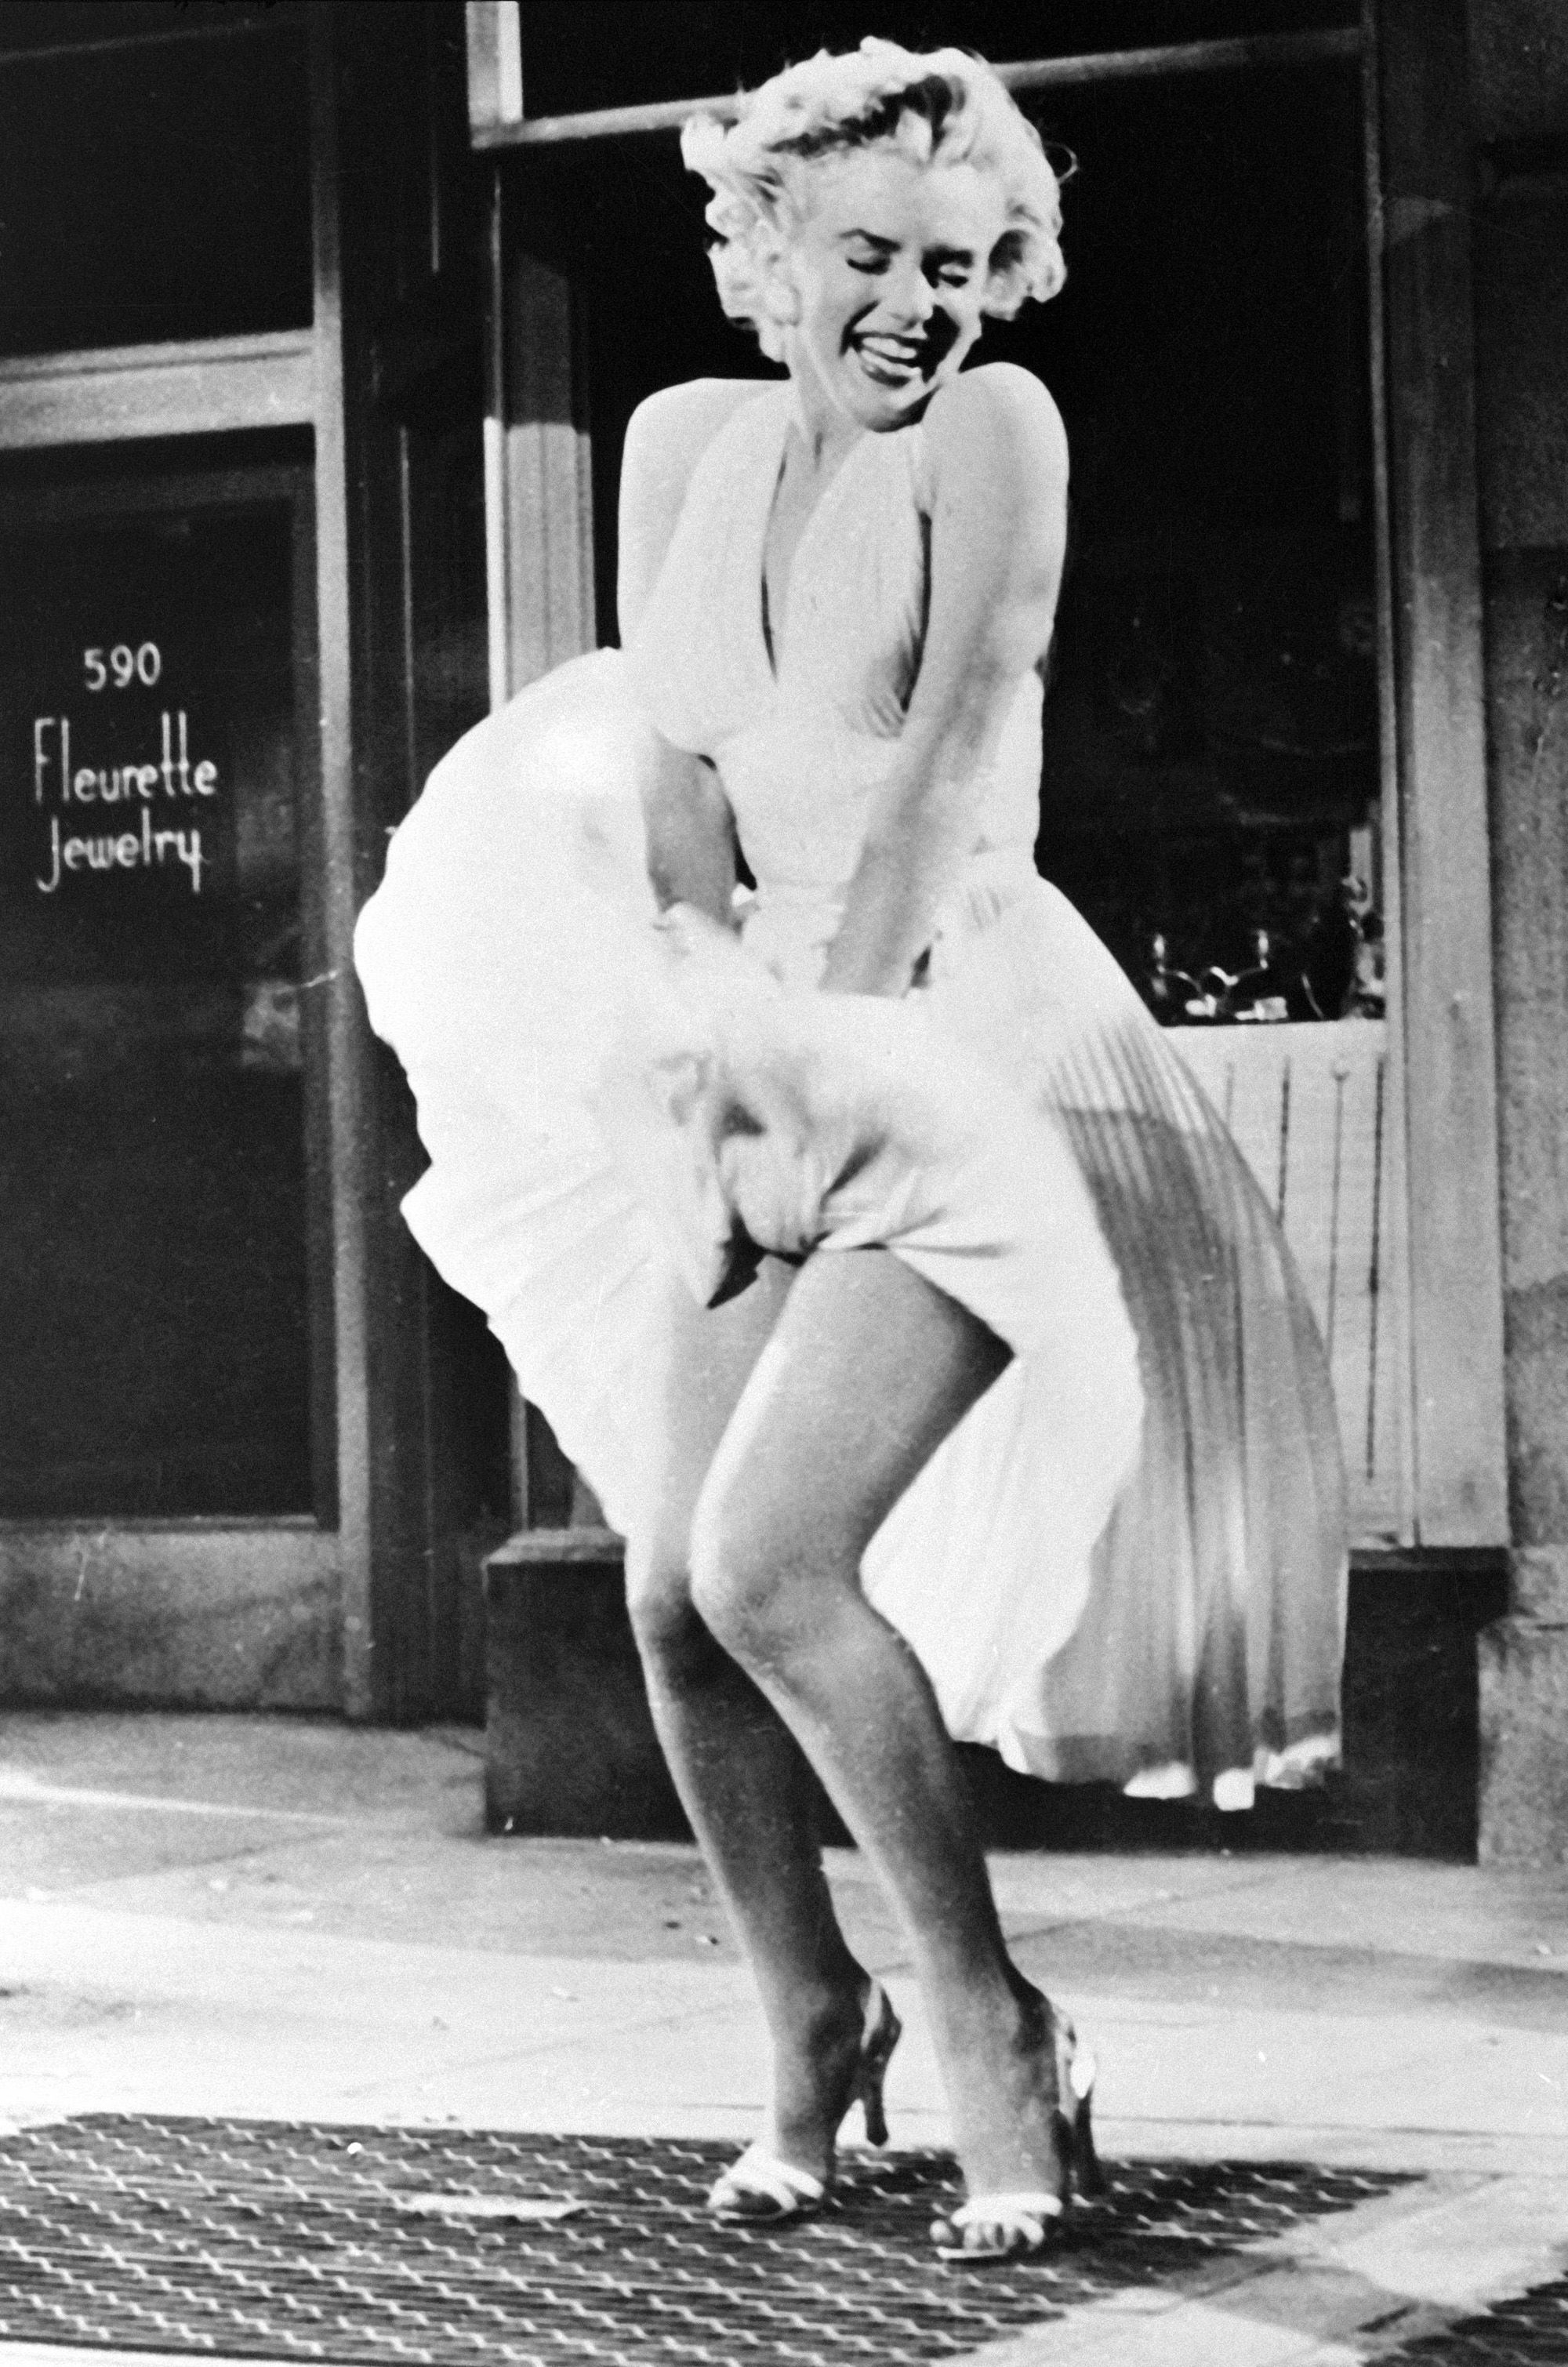 The neckline of Sweeney's gown bore a striking resemblance to Monroe's infamous white dress worn in Billy Wilder's 1955 film "The Seven Year Itch."